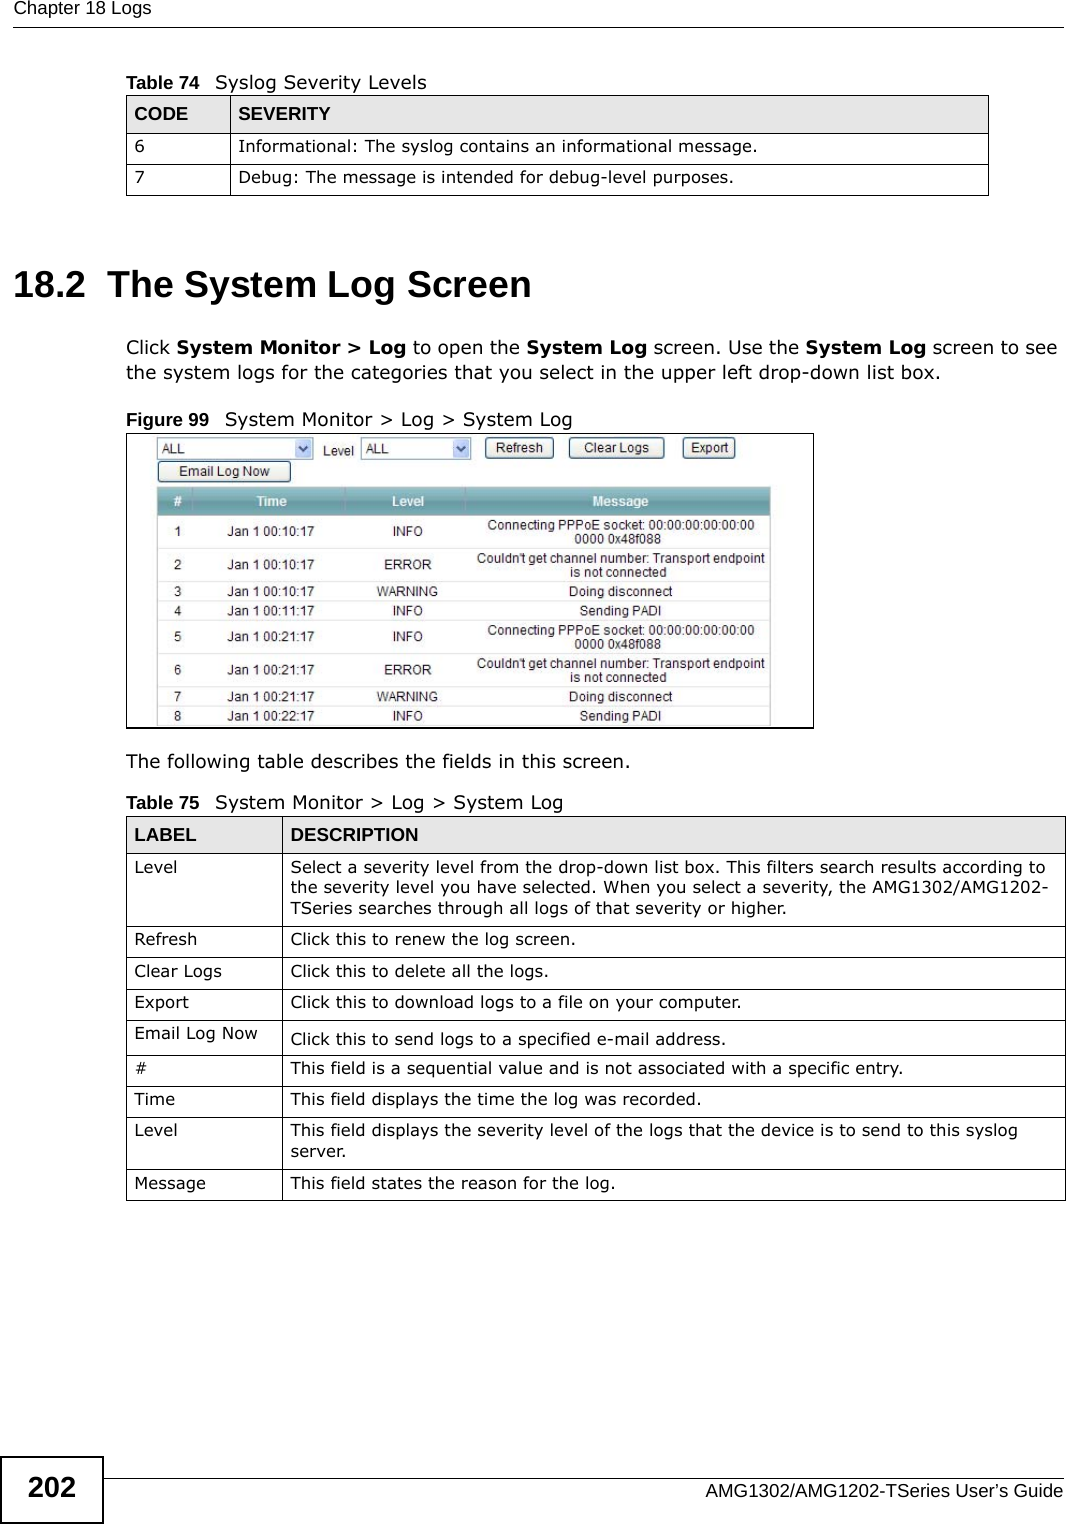 Chapter 18 LogsAMG1302/AMG1202-TSeries User’s Guide20218.2  The System Log Screen Click System Monitor &gt; Log to open the System Log screen. Use the System Log screen to see the system logs for the categories that you select in the upper left drop-down list box. Figure 99   System Monitor &gt; Log &gt; System LogThe following table describes the fields in this screen.6 Informational: The syslog contains an informational message.7 Debug: The message is intended for debug-level purposes.Table 74   Syslog Severity LevelsCODE SEVERITYTable 75   System Monitor &gt; Log &gt; System LogLABEL DESCRIPTIONLevel  Select a severity level from the drop-down list box. This filters search results according to the severity level you have selected. When you select a severity, the AMG1302/AMG1202-TSeries searches through all logs of that severity or higher. Refresh Click this to renew the log screen. Clear Logs Click this to delete all the logs. Export Click this to download logs to a file on your computer.Email Log Now Click this to send logs to a specified e-mail address.#This field is a sequential value and is not associated with a specific entry.Time  This field displays the time the log was recorded. Level This field displays the severity level of the logs that the device is to send to this syslog server.Message This field states the reason for the log.